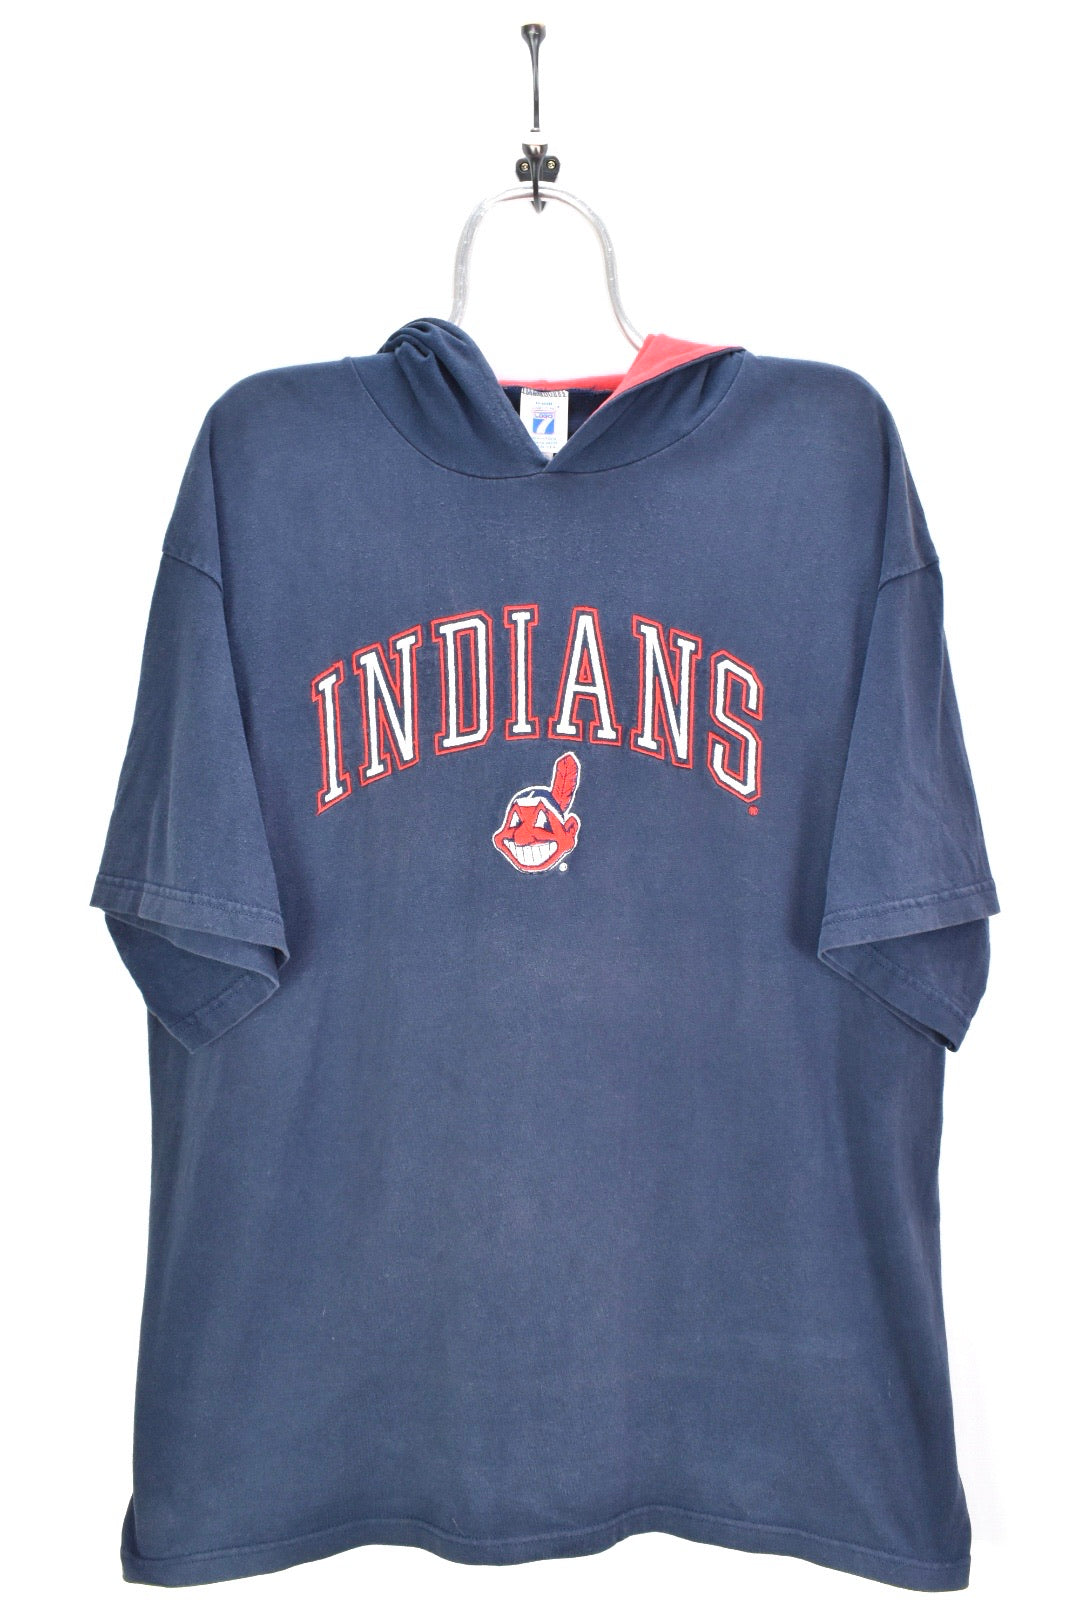 VINTAGE NHL CHICAGO INDIANS EMBROIDERED HOODED T-SHIRT | XL PRO SPORT